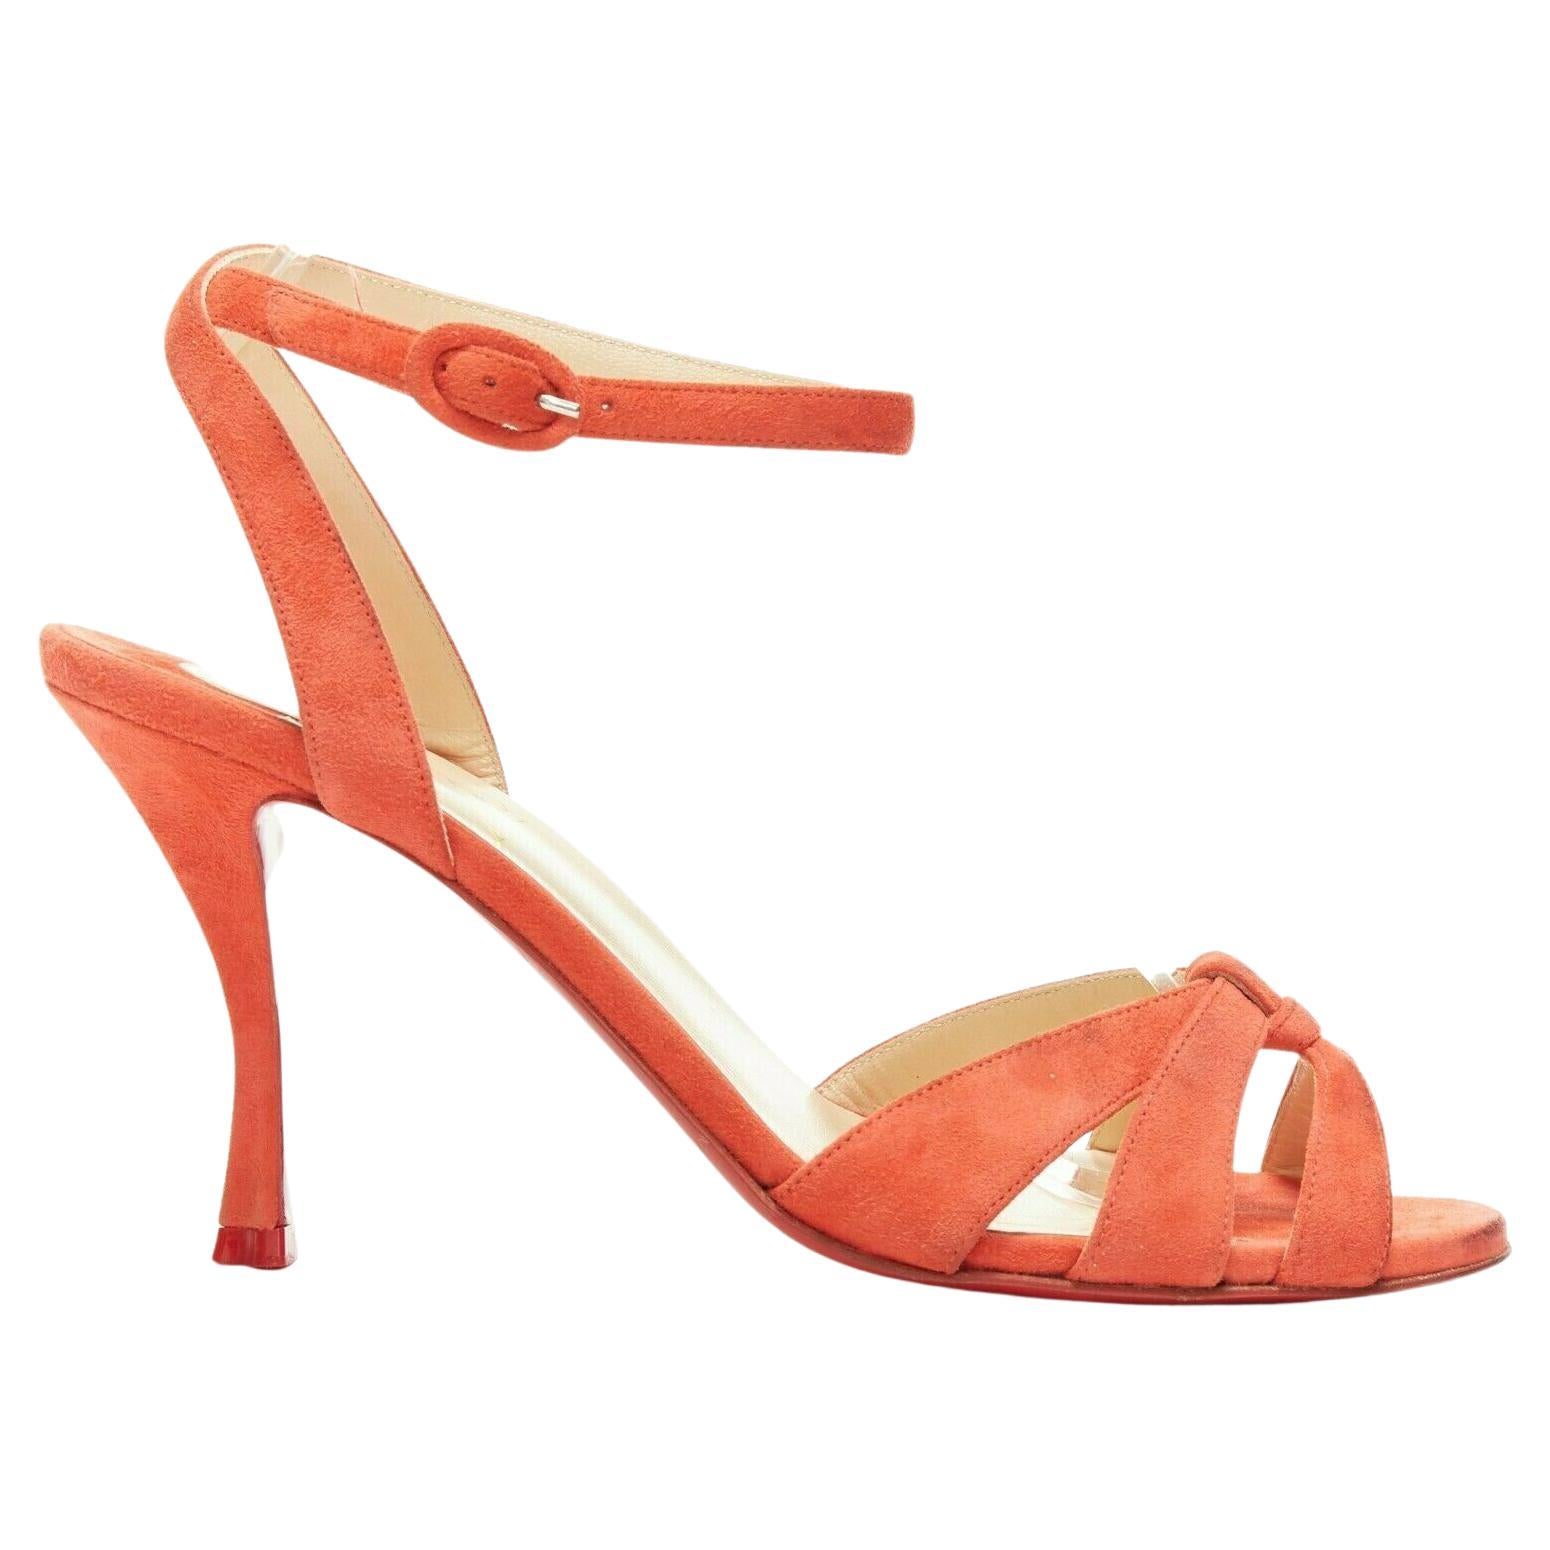 CHRISTIAN LOUBOUTIN red suede strappy ankle strap curved mid heel sandals EU37 For Sale